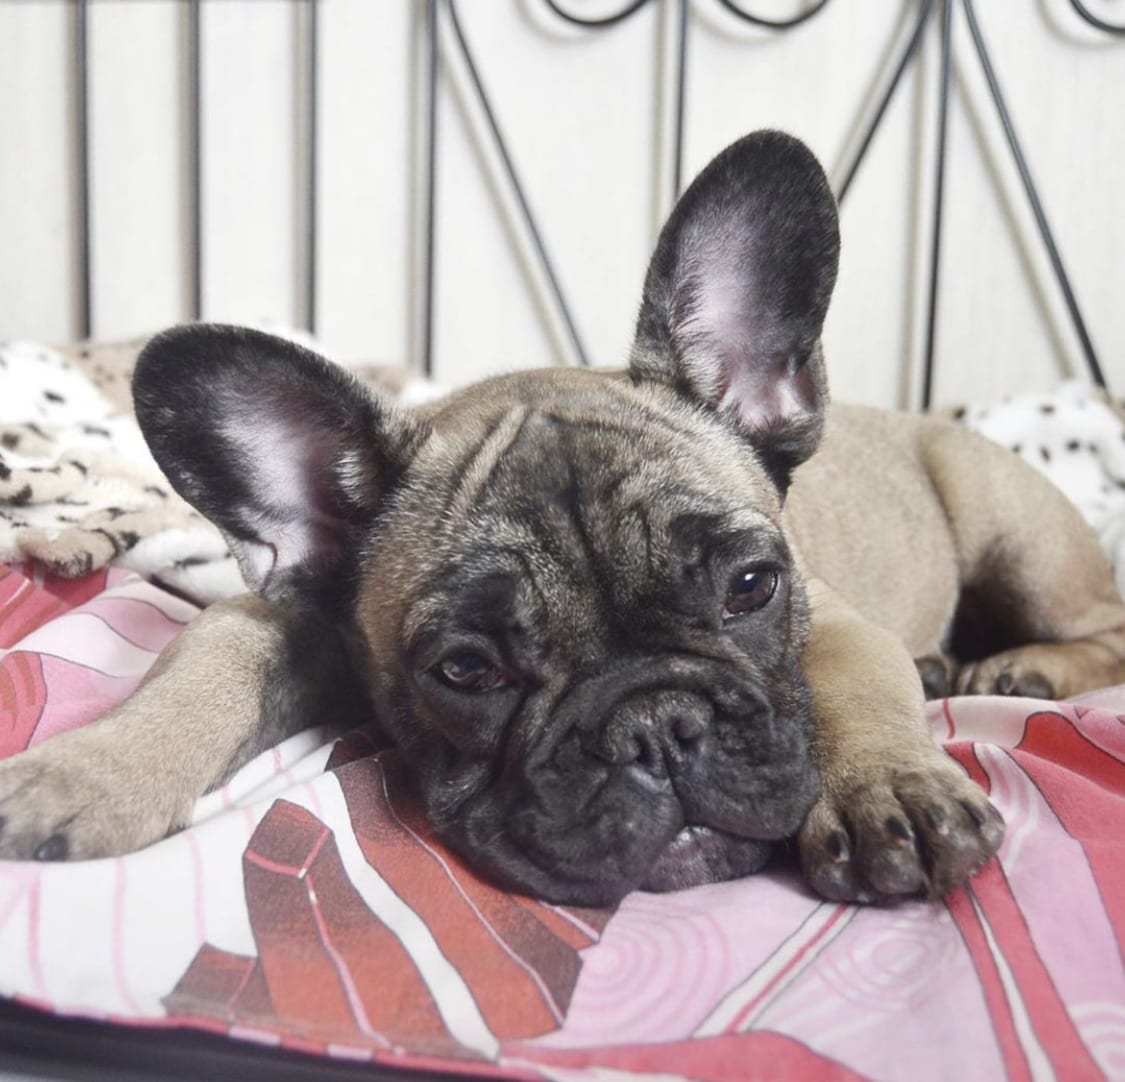 A French Bulldog lying on the bed with its tired face